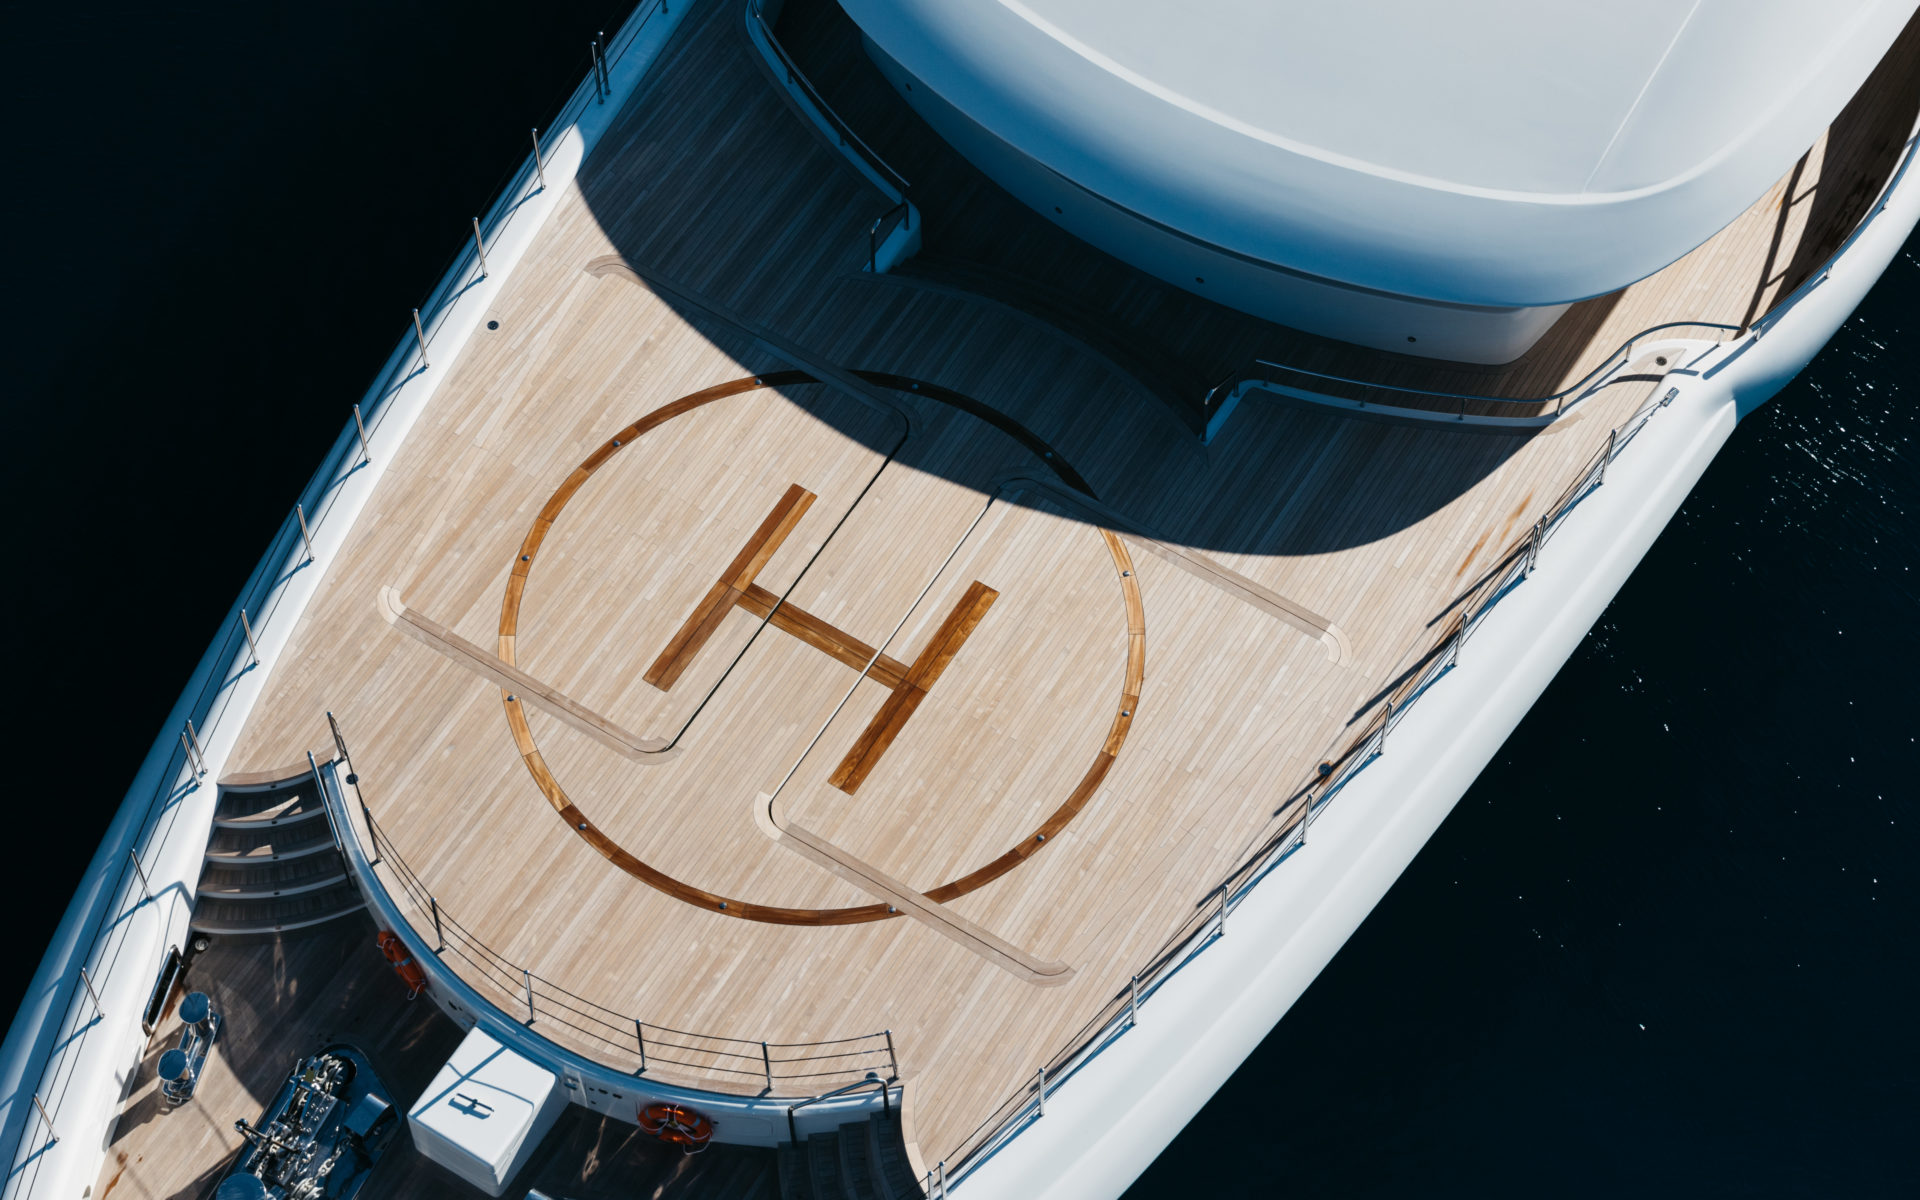 how to buy yacht